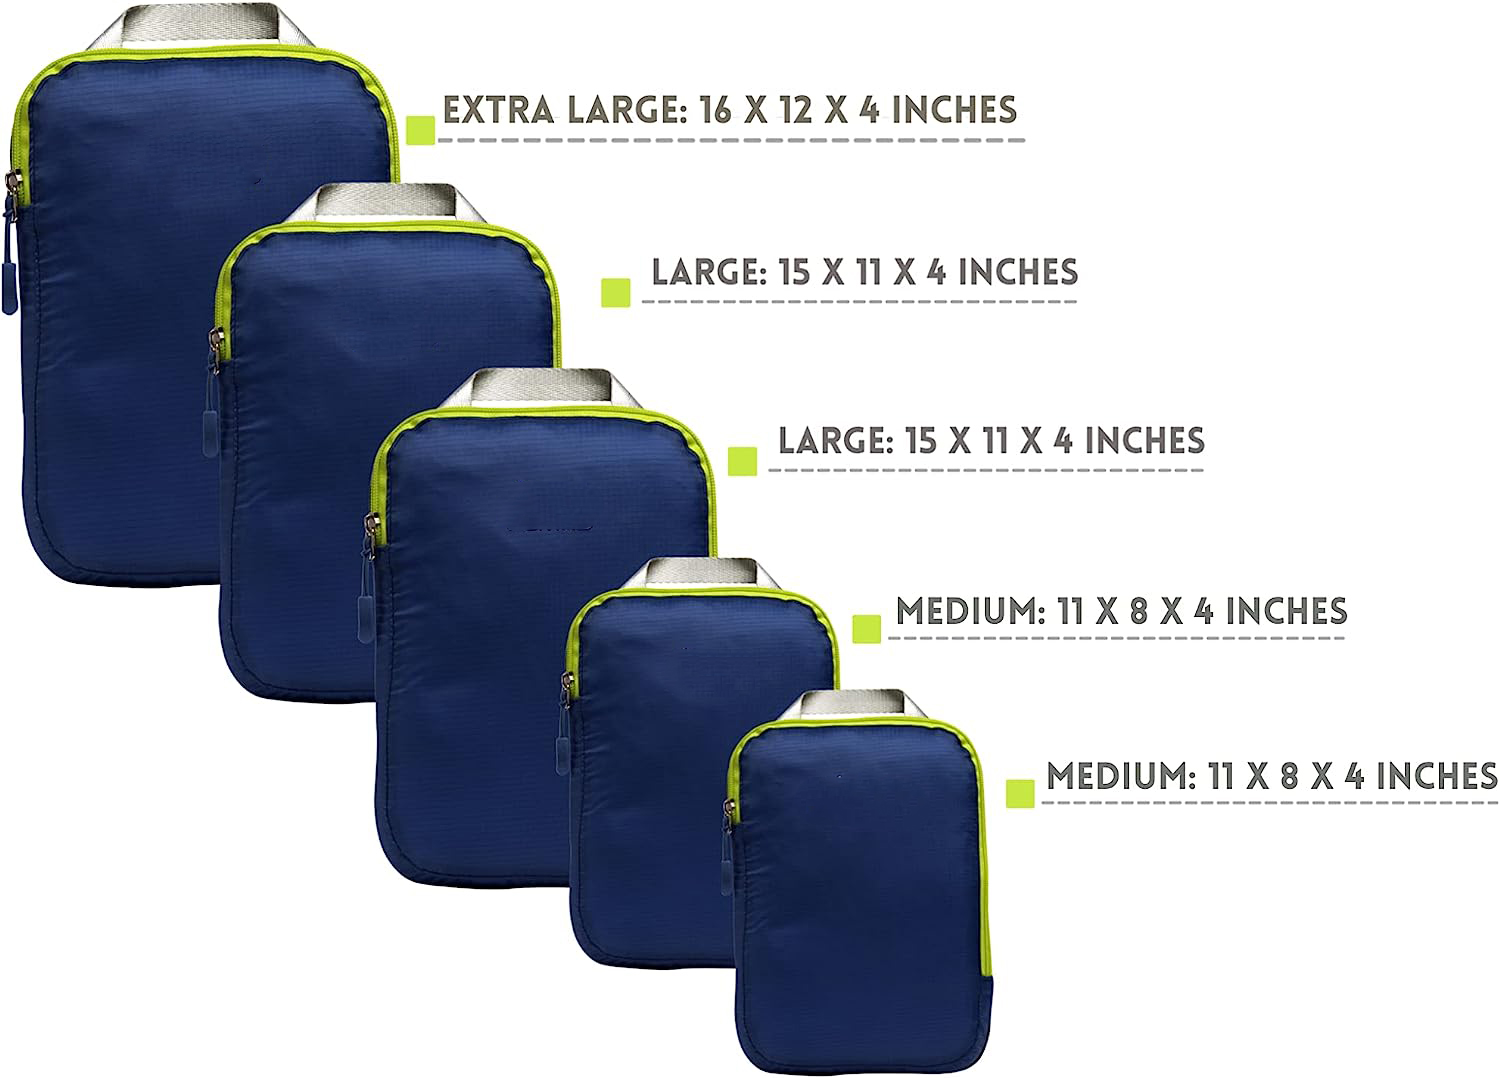 WellPromotion Compression Packing Cubes Set 